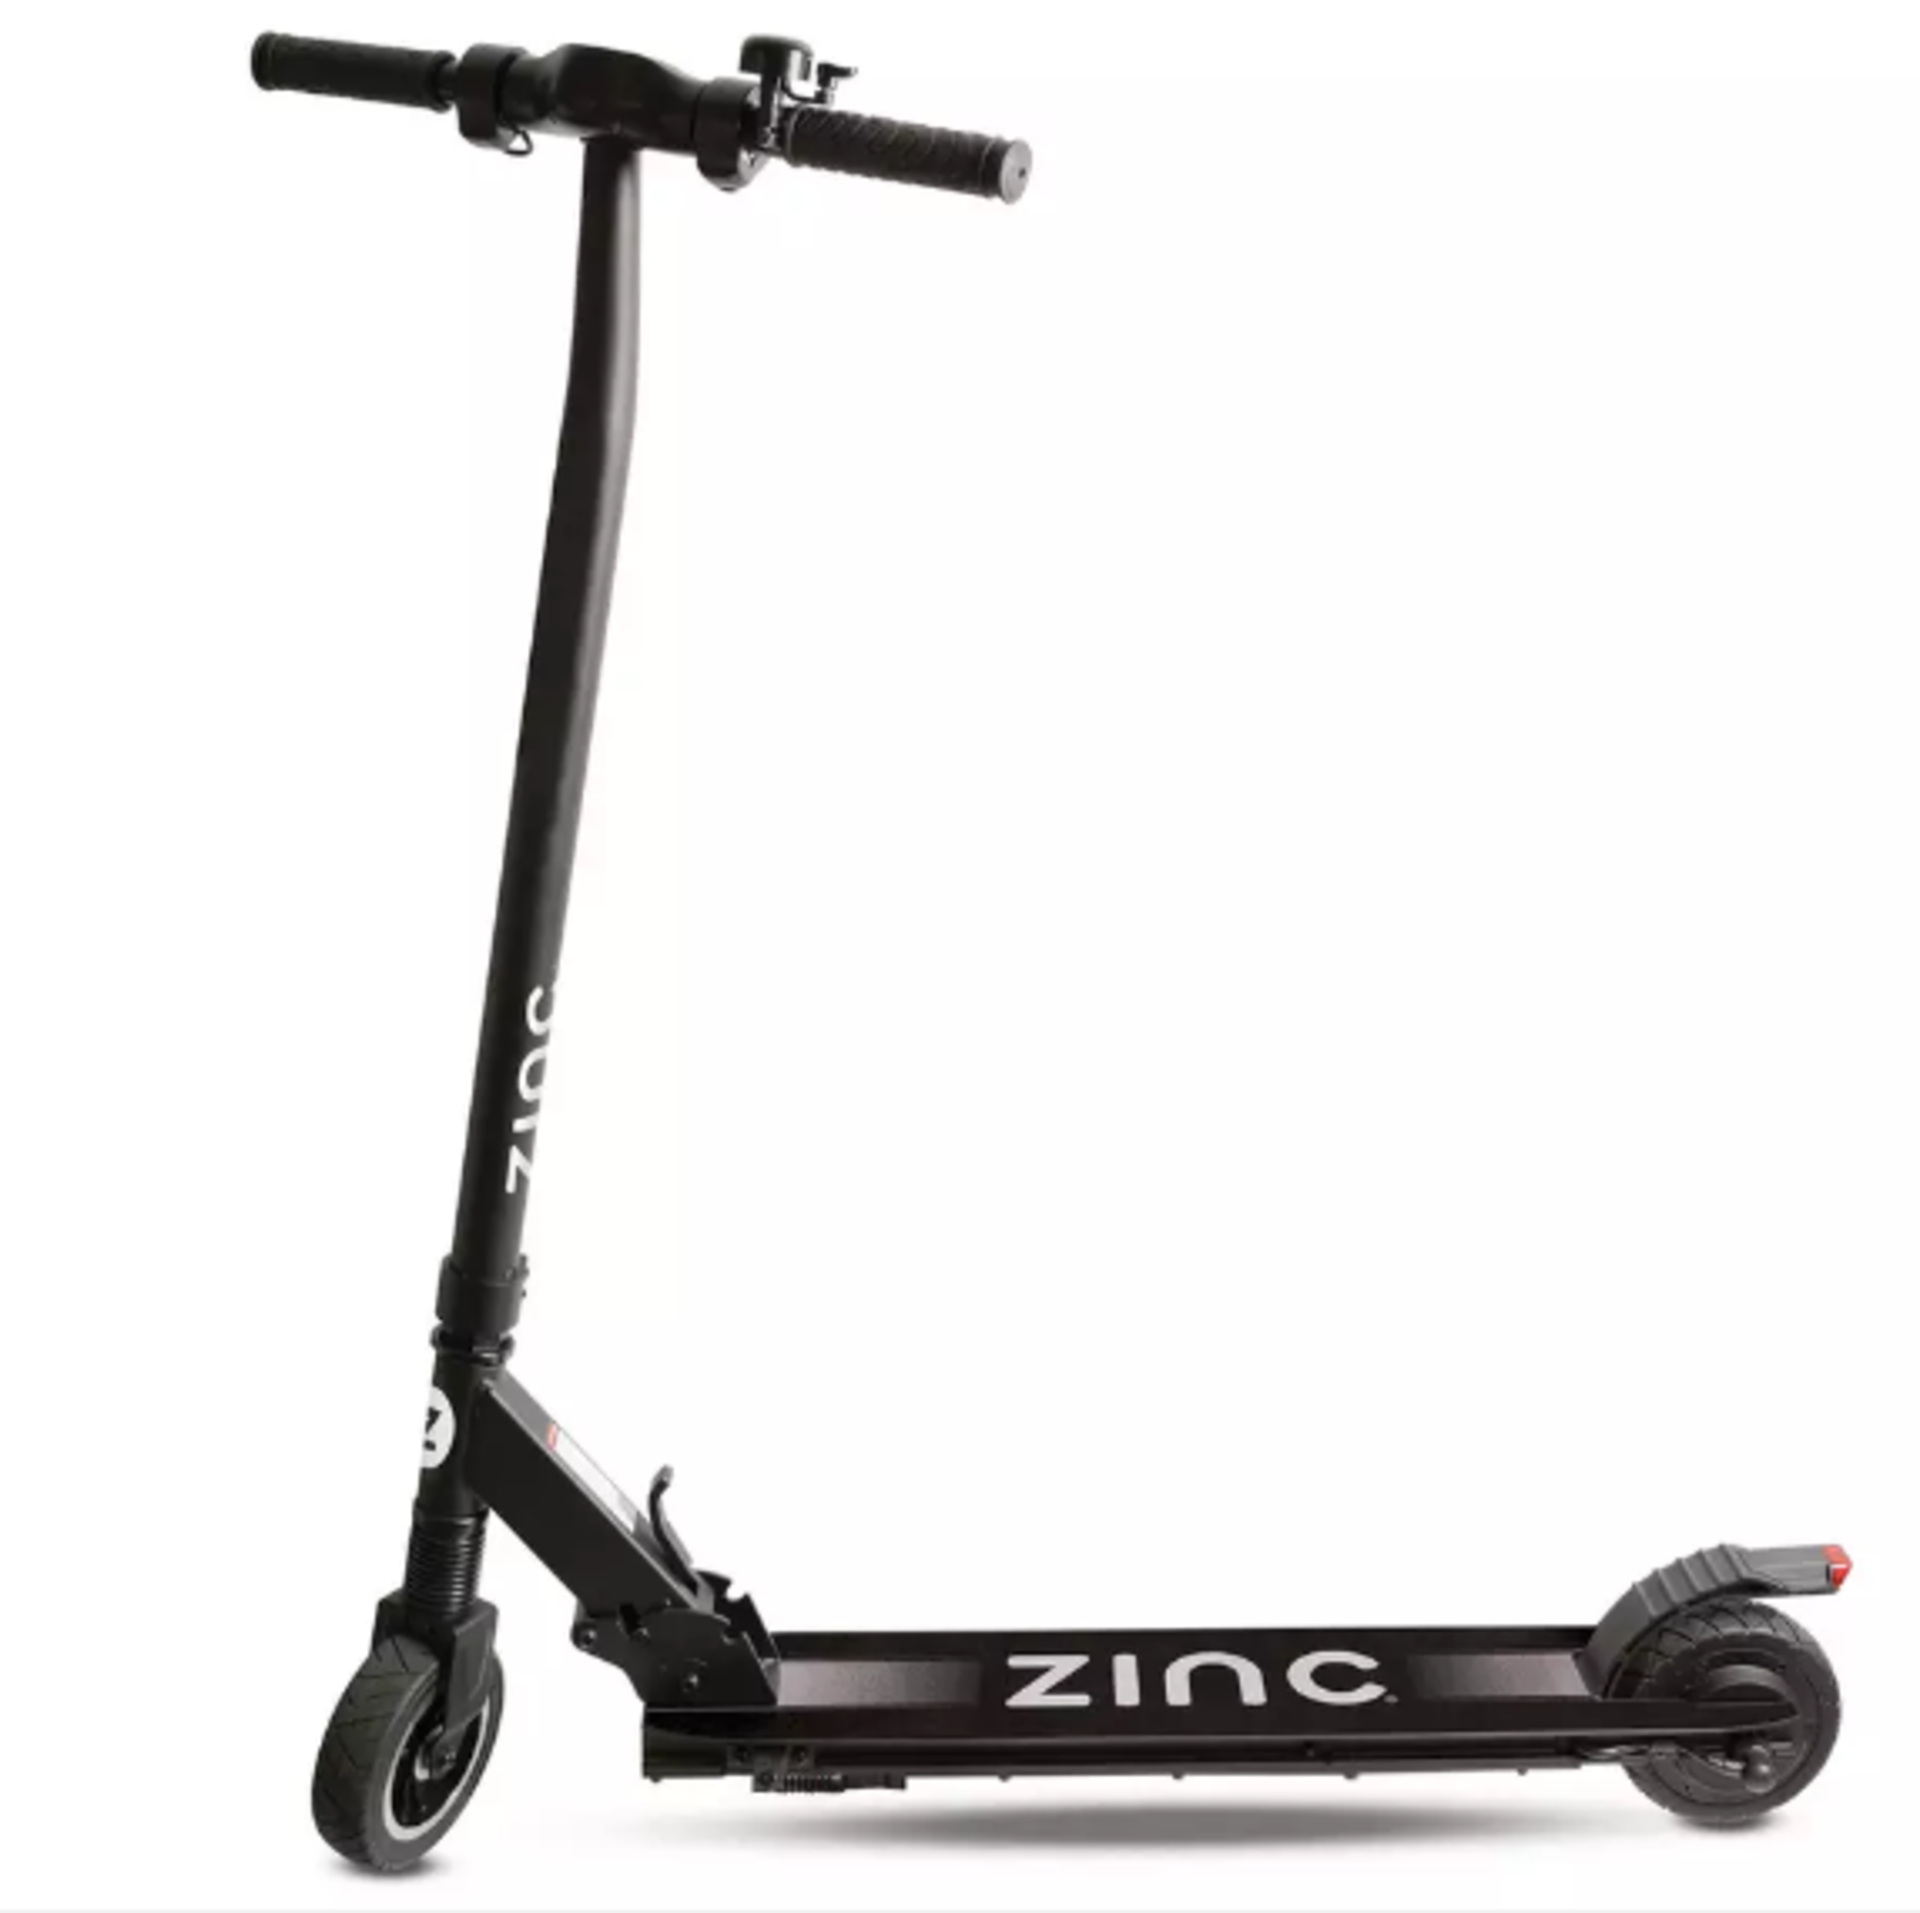 Zinc Eco 6 Inch Solid Rubber Electric Scooter. RRP £250.00. The Zinc folding electric Eco is a